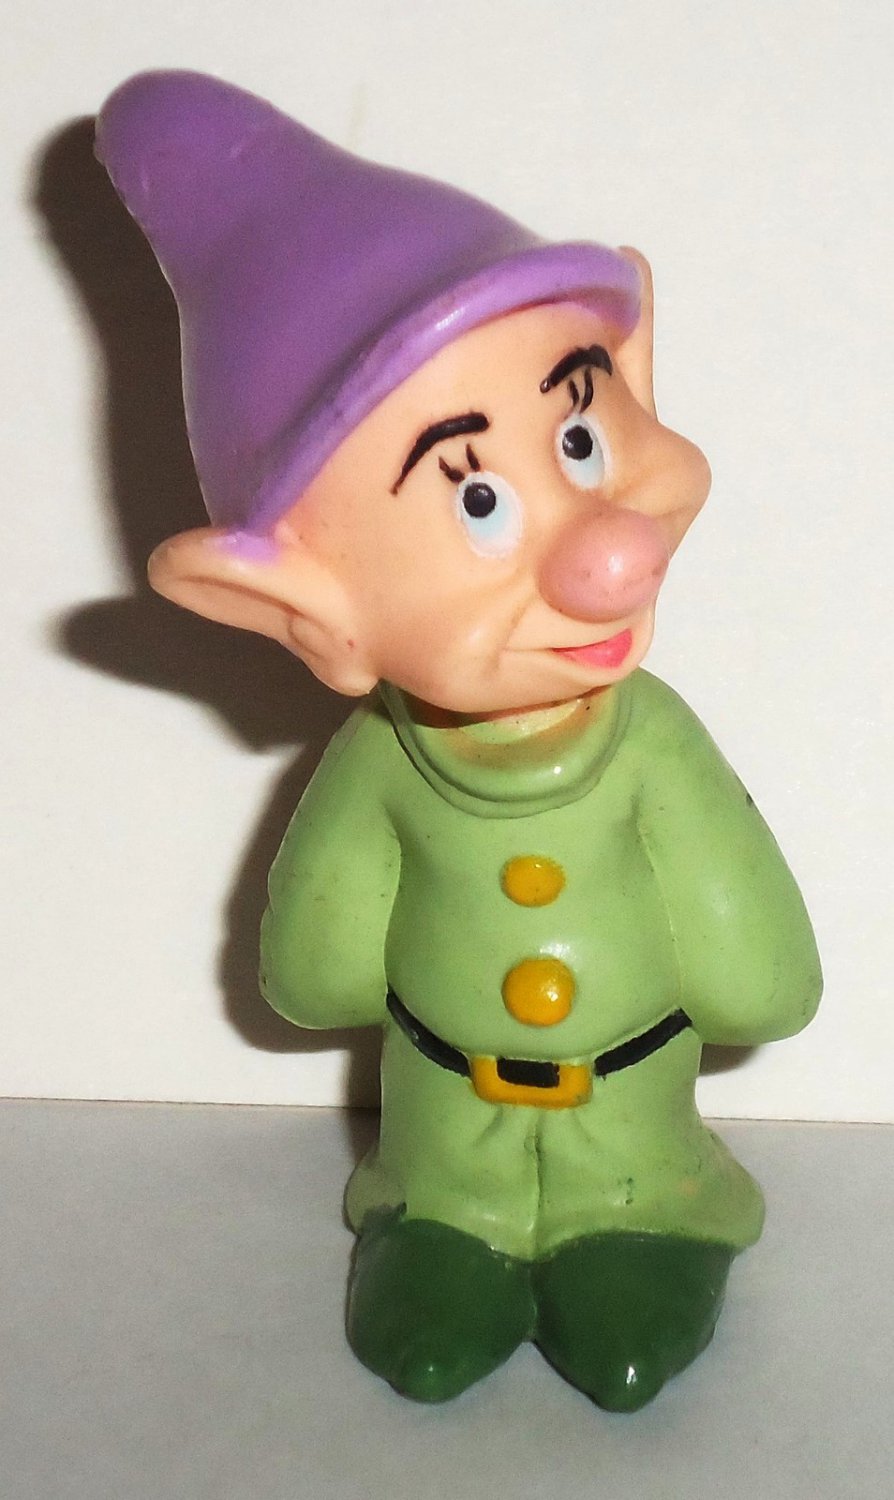 Disneys Snow White And The Seven Dwarfs Dopey Pvc Figure Mattel 1993 Loose Used 